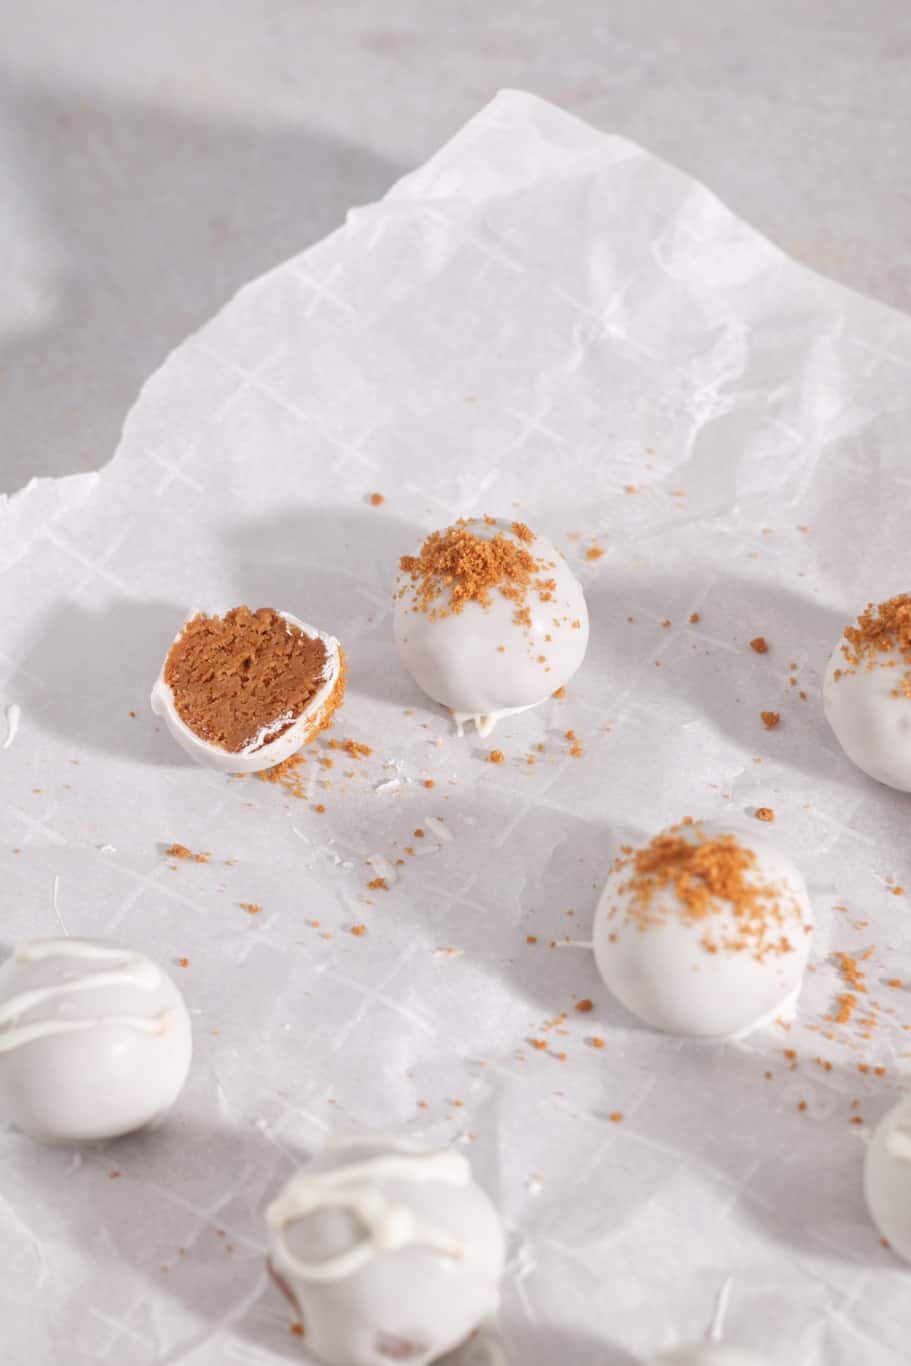 Deliciously creamy bite-sized no-bake lotus biscoff truffle balls, coated with a milk chocolate shell and sprinkled with lotus crumbs